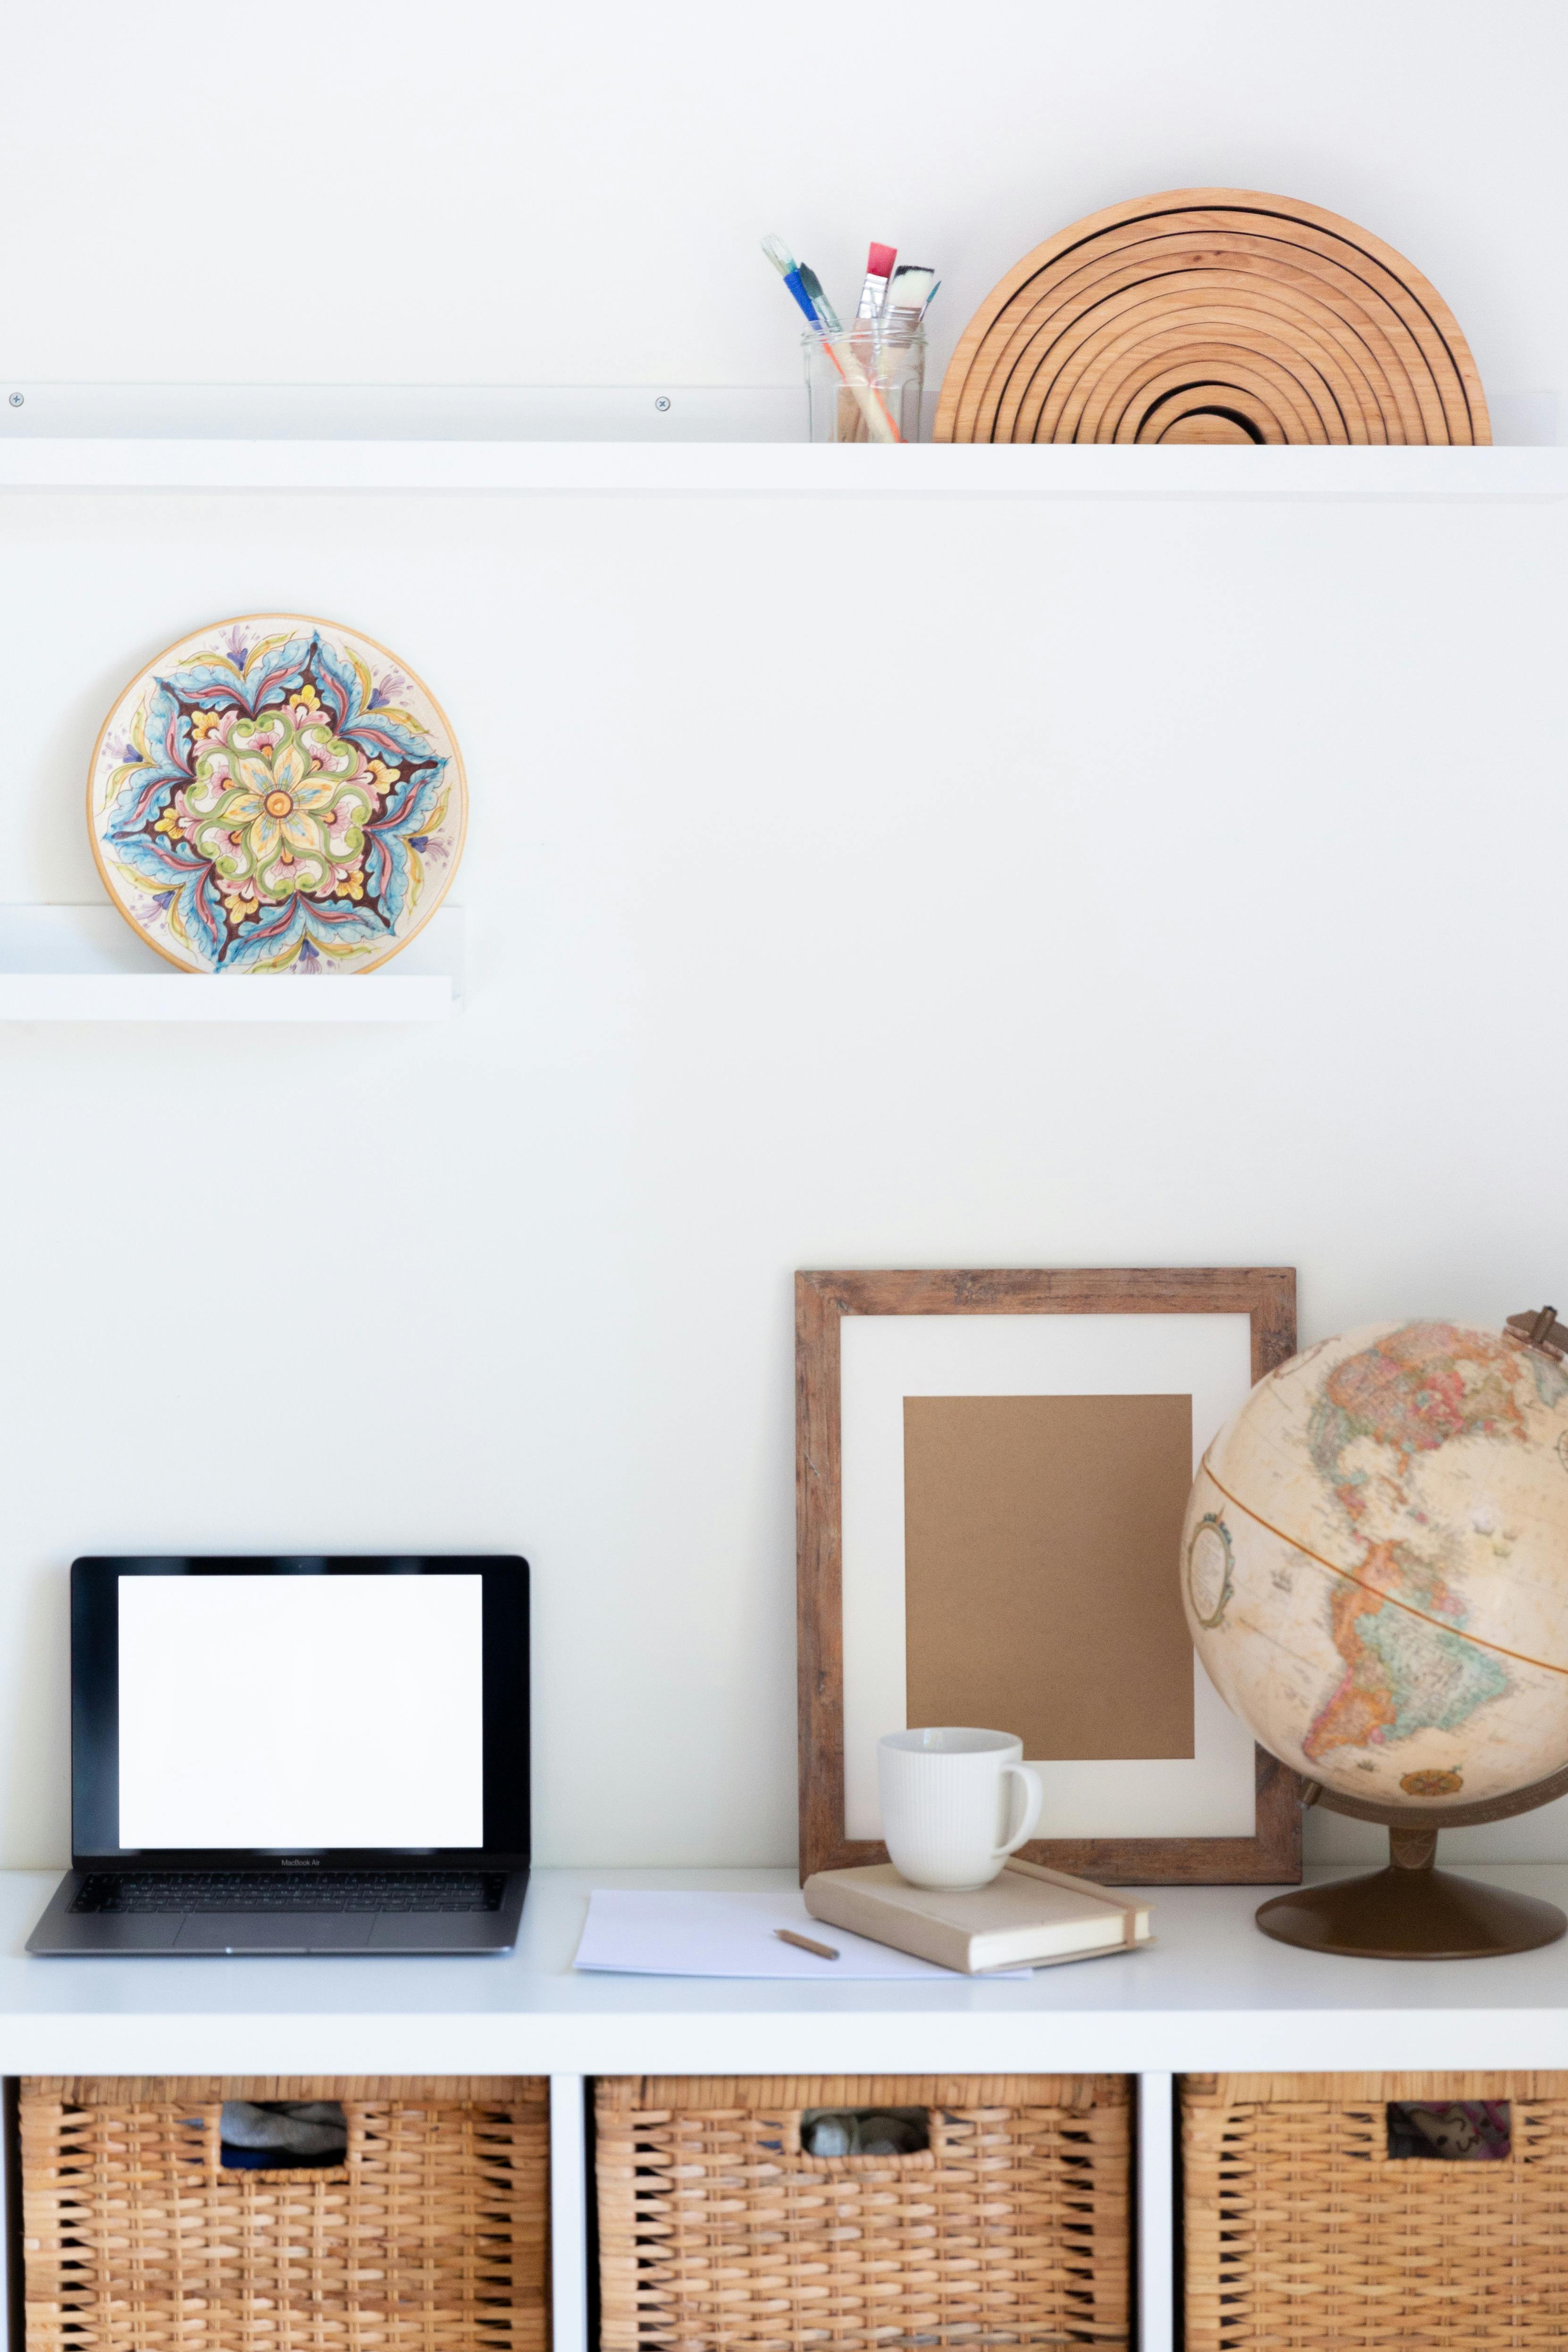 vintage furniture with empty frame and blank screen of netbook in light room